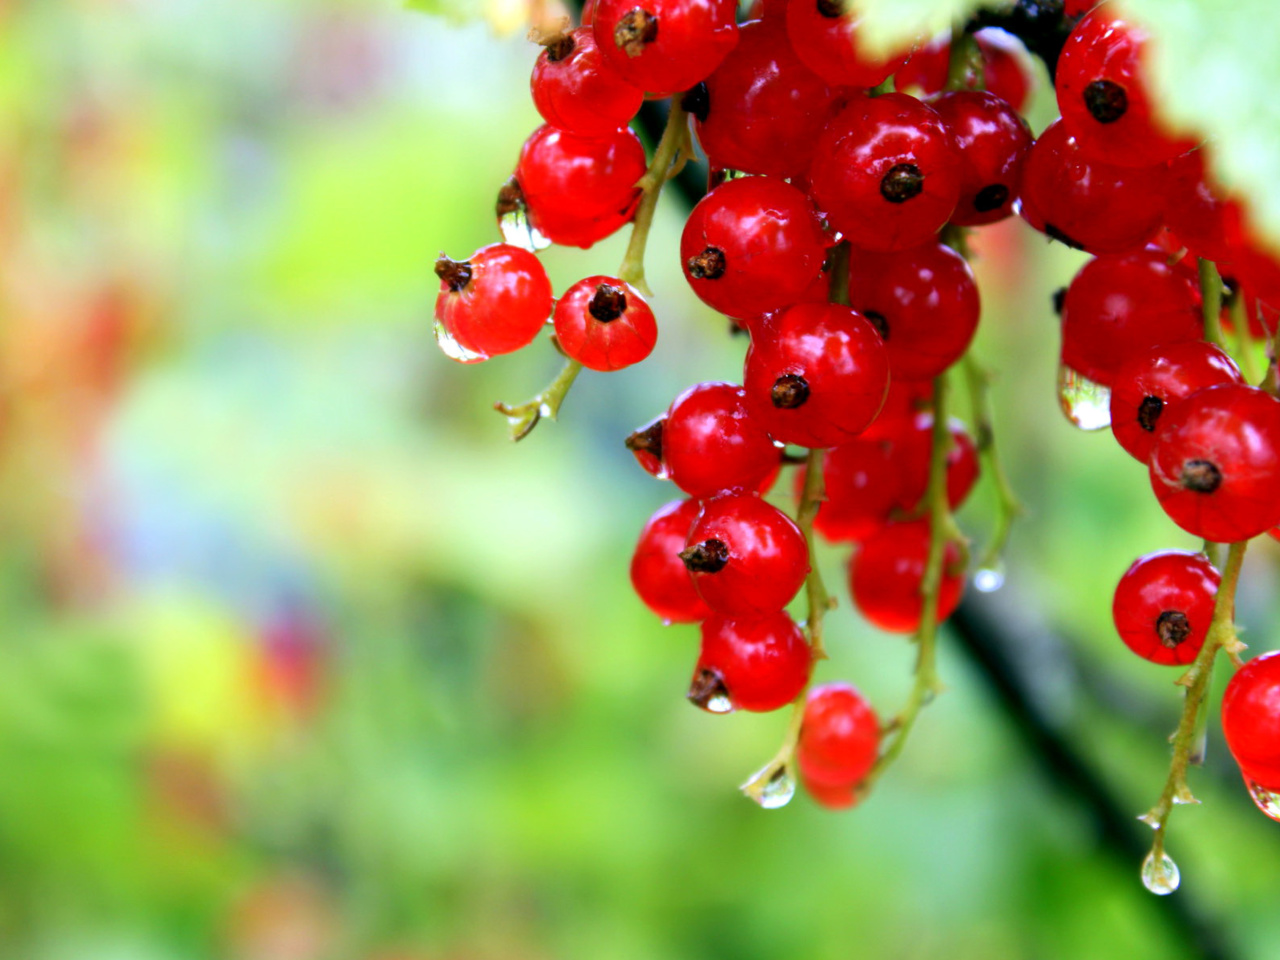 Red currant with Dew screenshot #1 1280x960